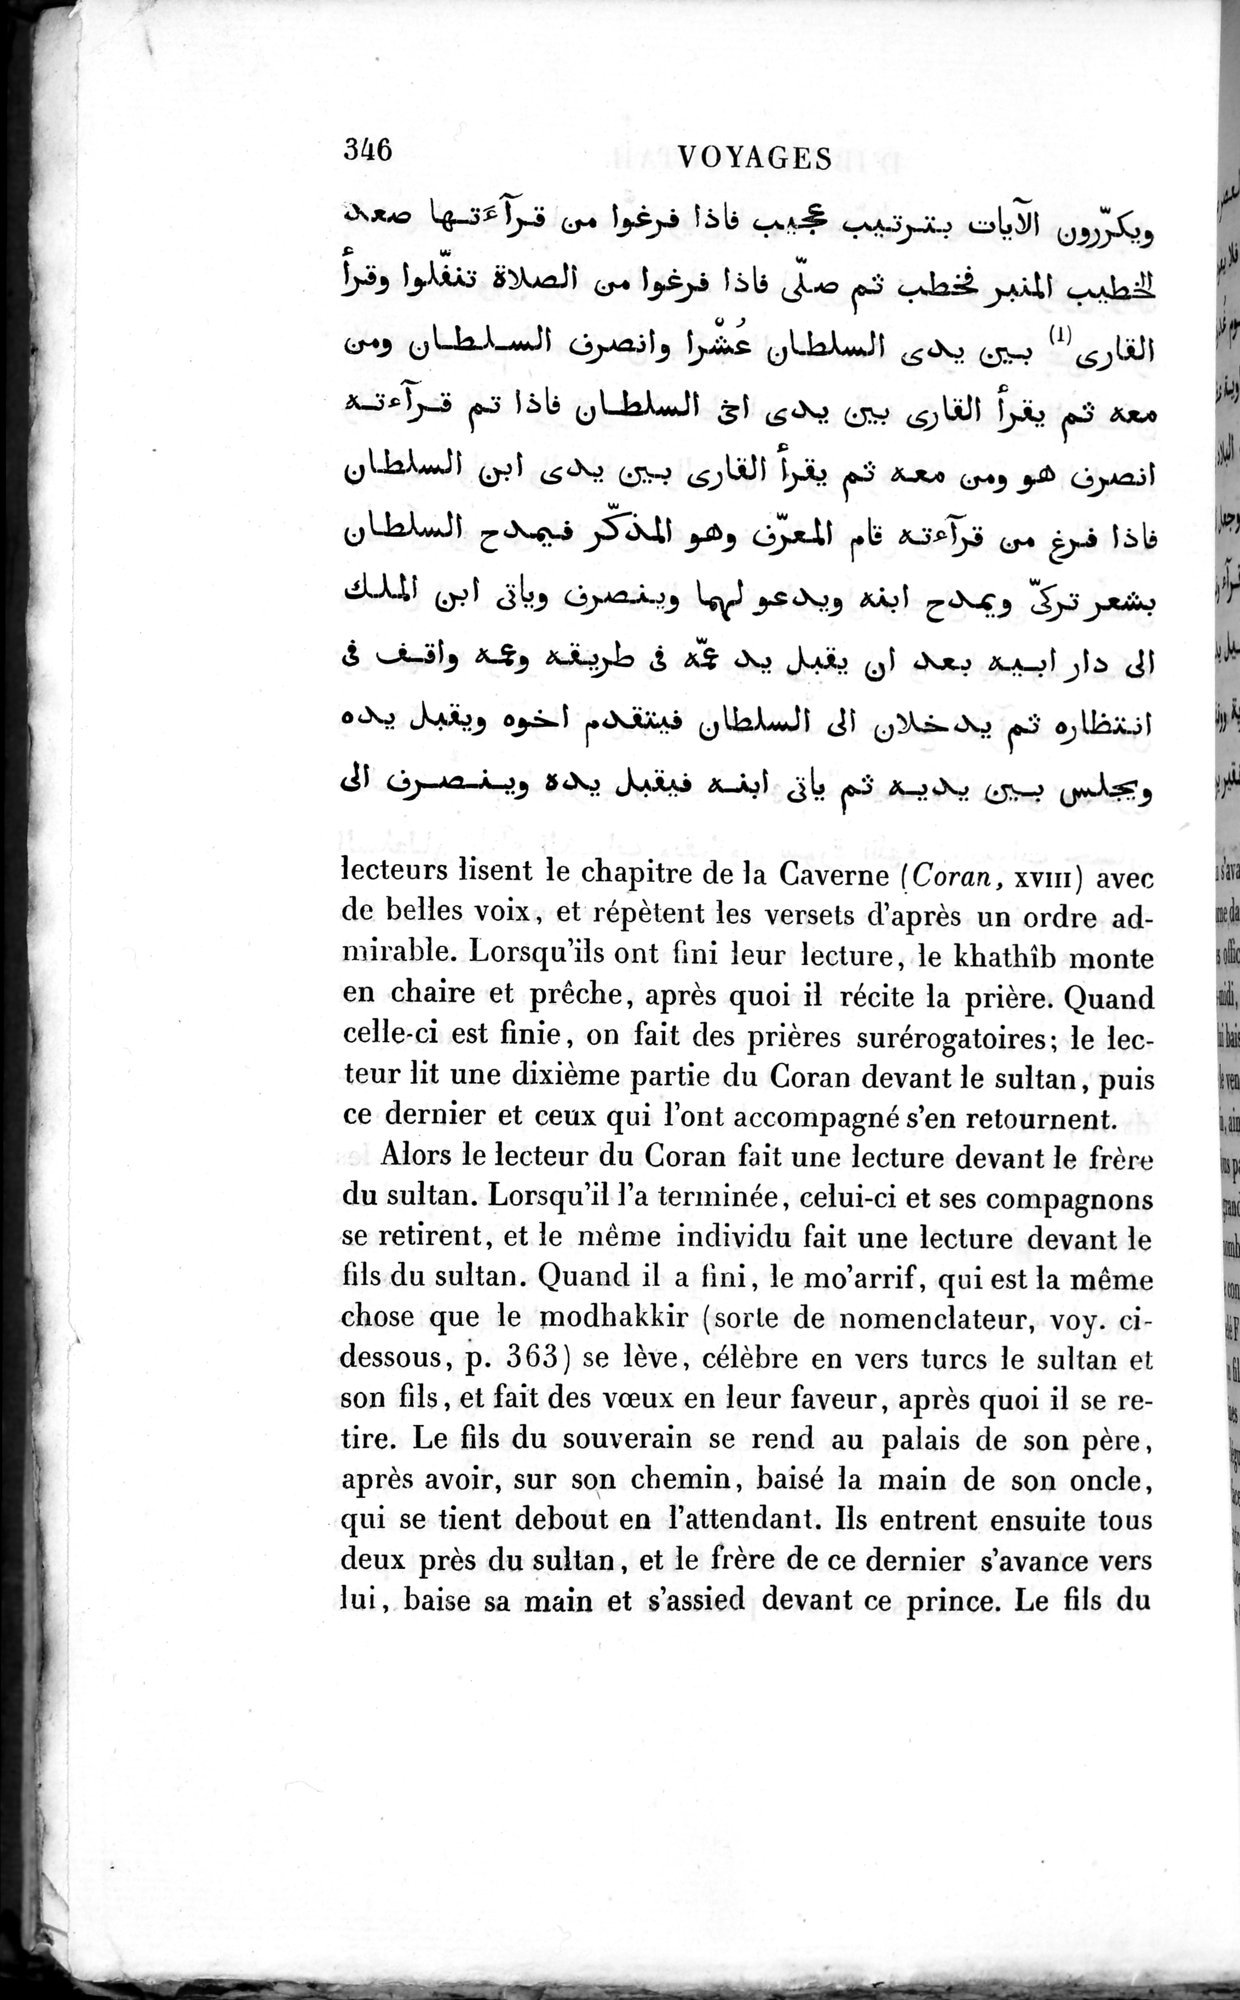 Voyages d'Ibn Batoutah : vol.2 / Page 374 (Grayscale High Resolution Image)